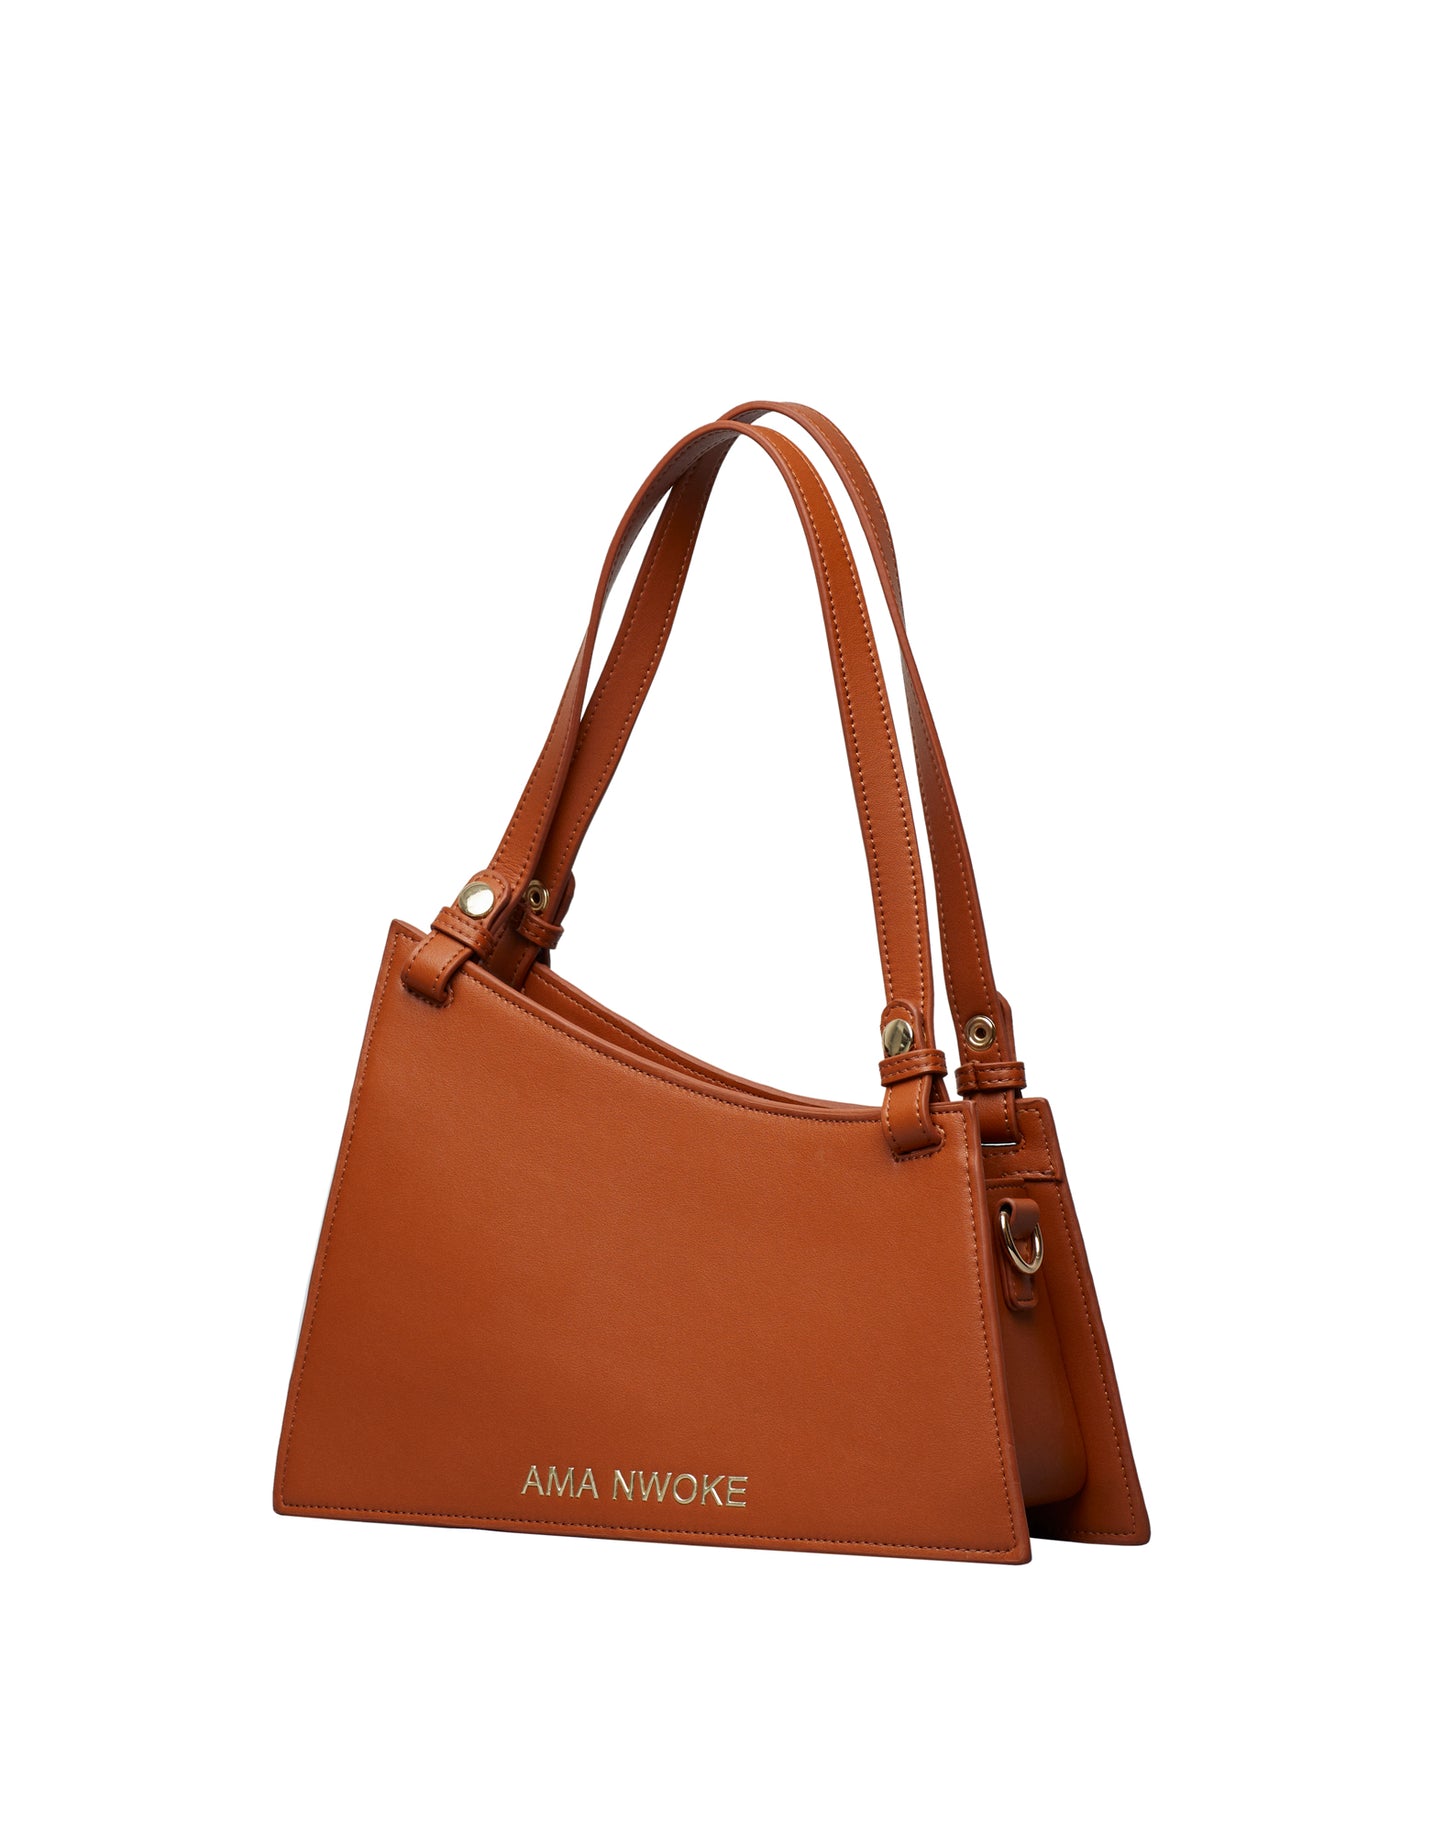 Claudanne  Brown Leather Bag